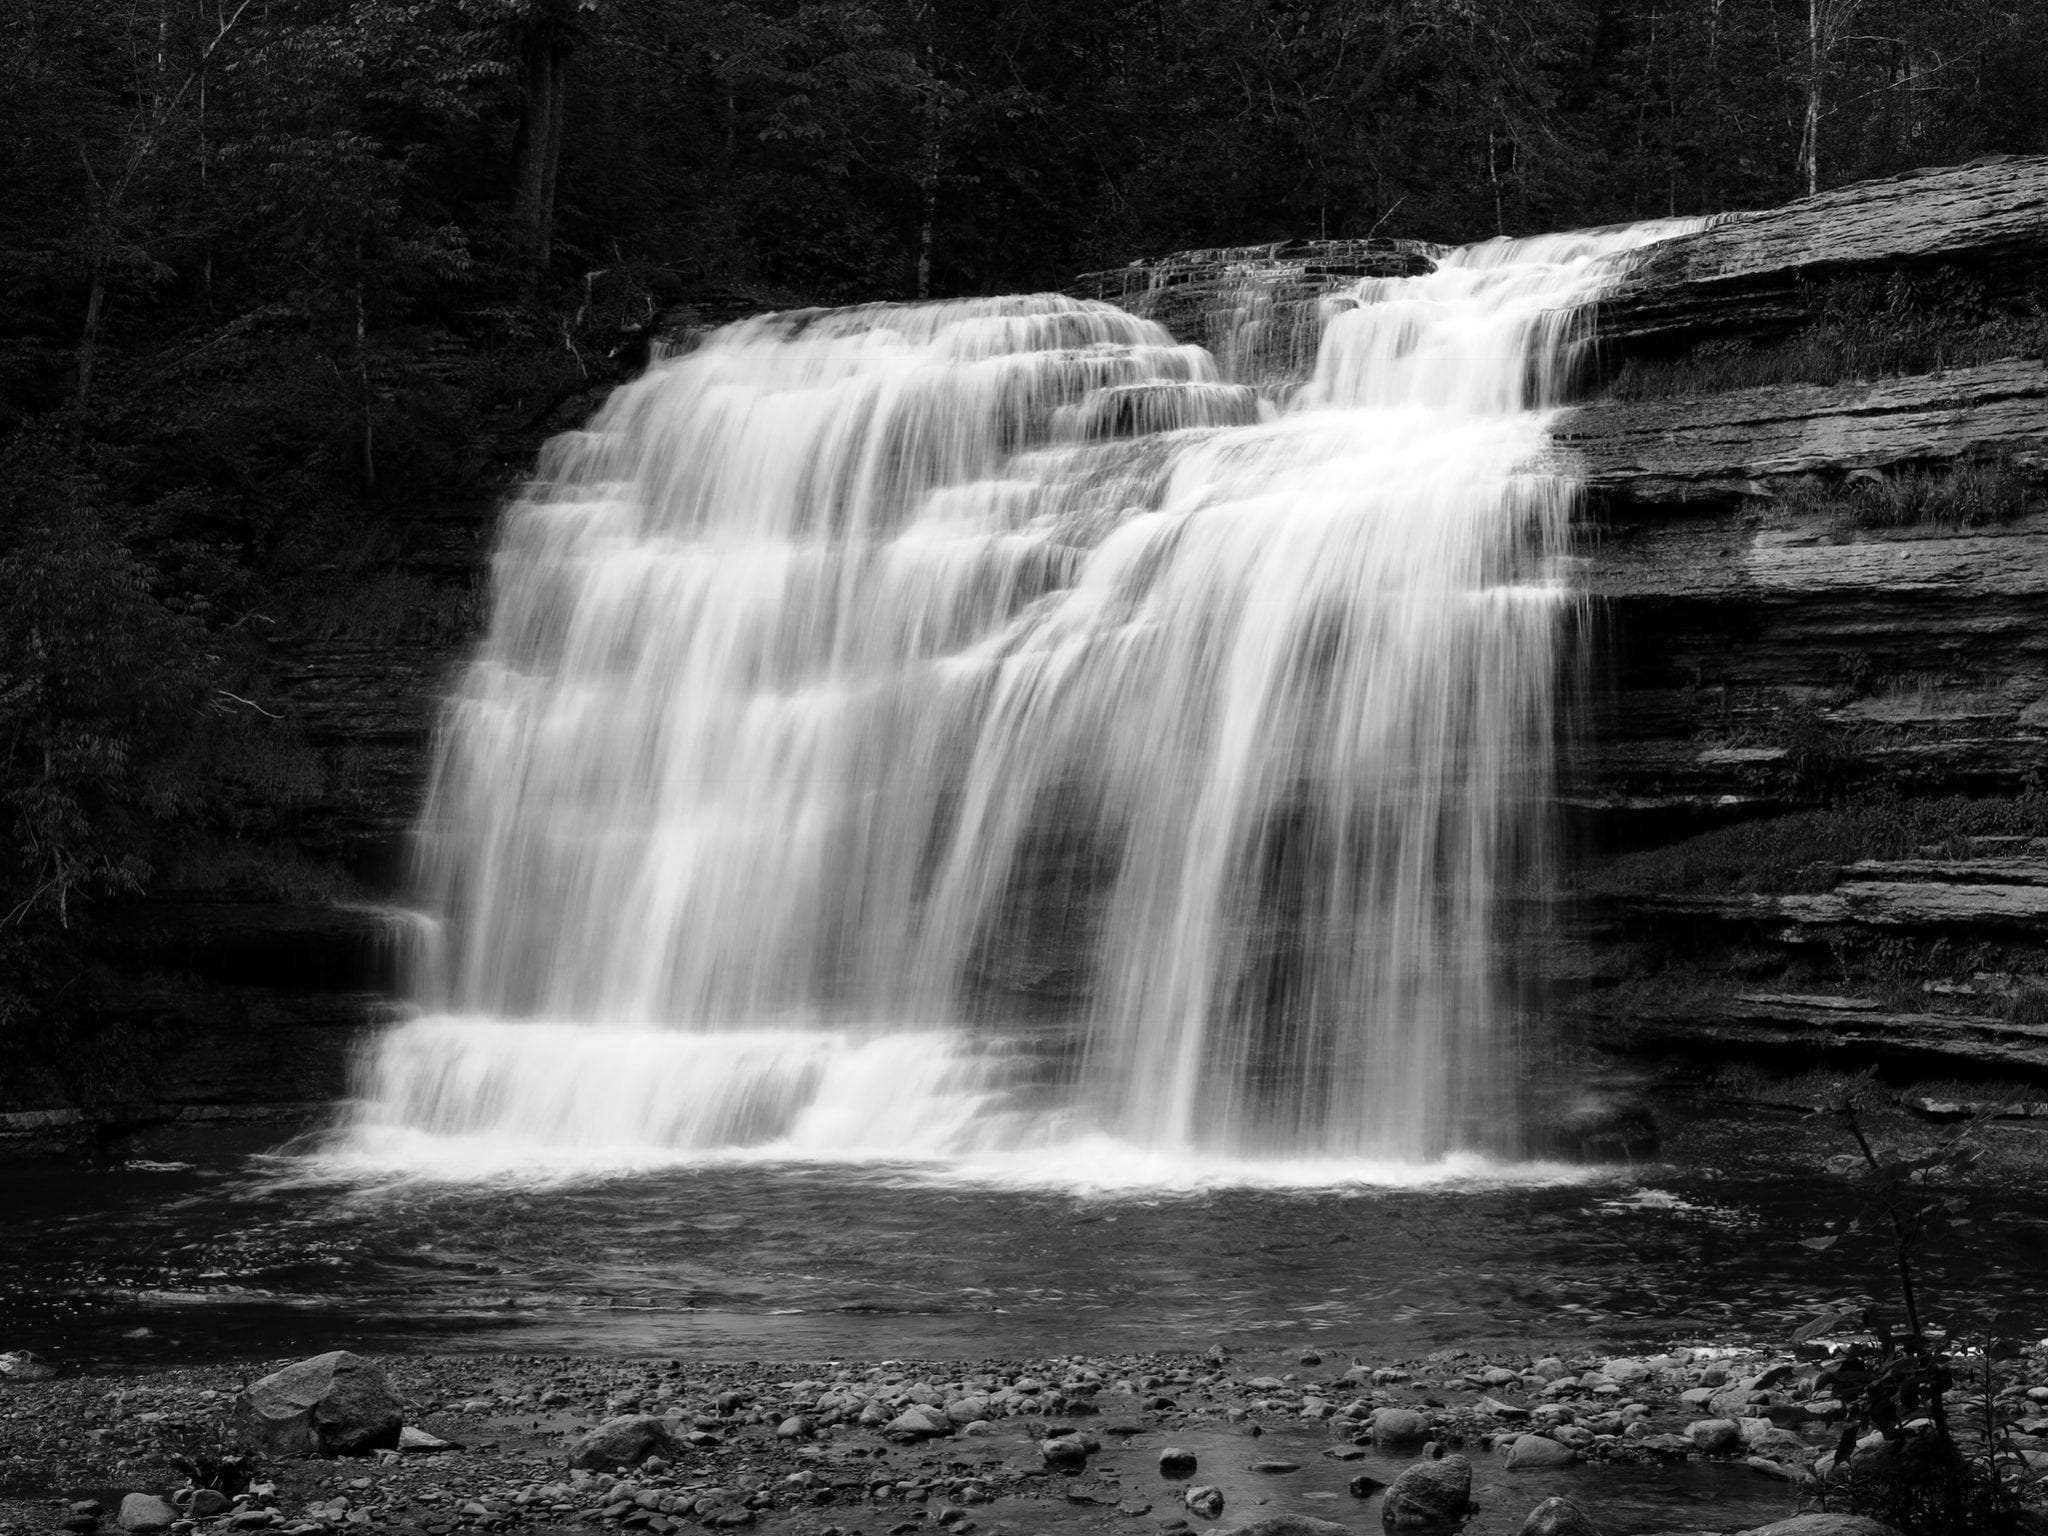 Photograph of Pixley Falls, NY by Jake K. Siders, 13, homeschooled in CA. He won 1st place and People's choice in TriValley Conservancy Freeze Frame photo contest this summer with a different photo.